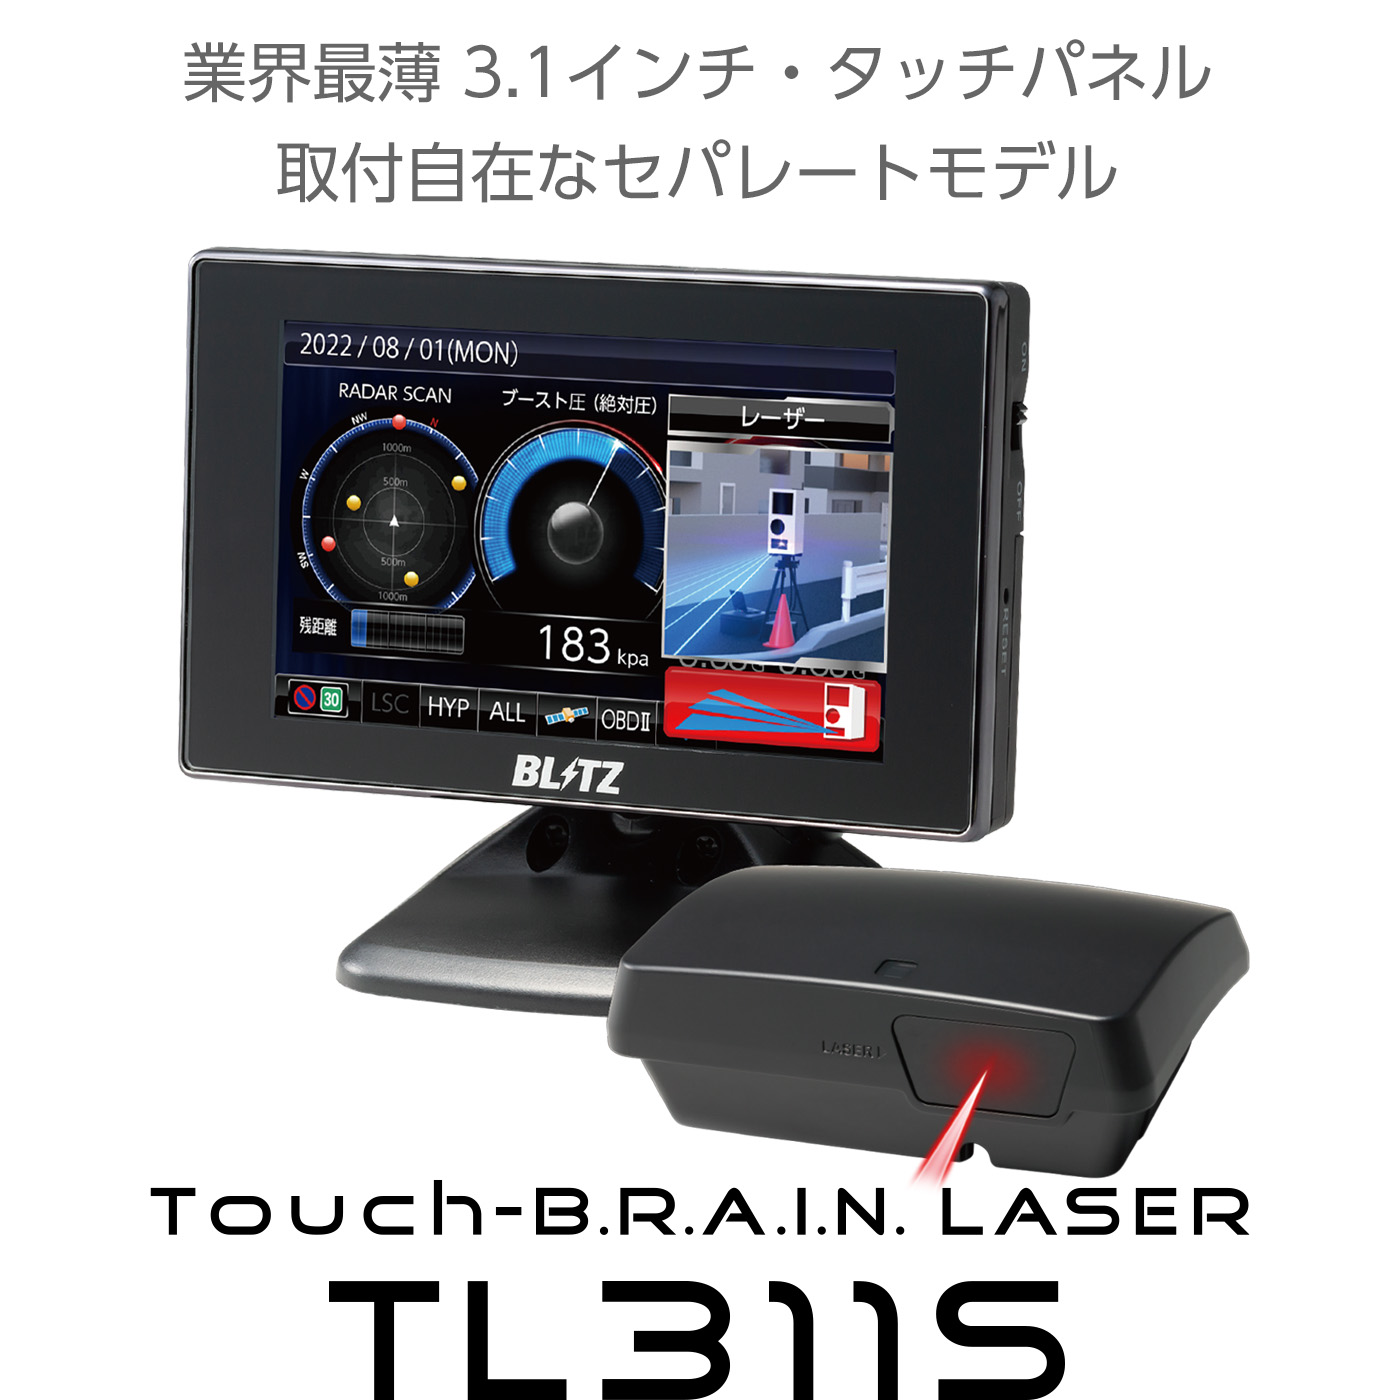 Touch-B.R.A.I.N. LASER 311S